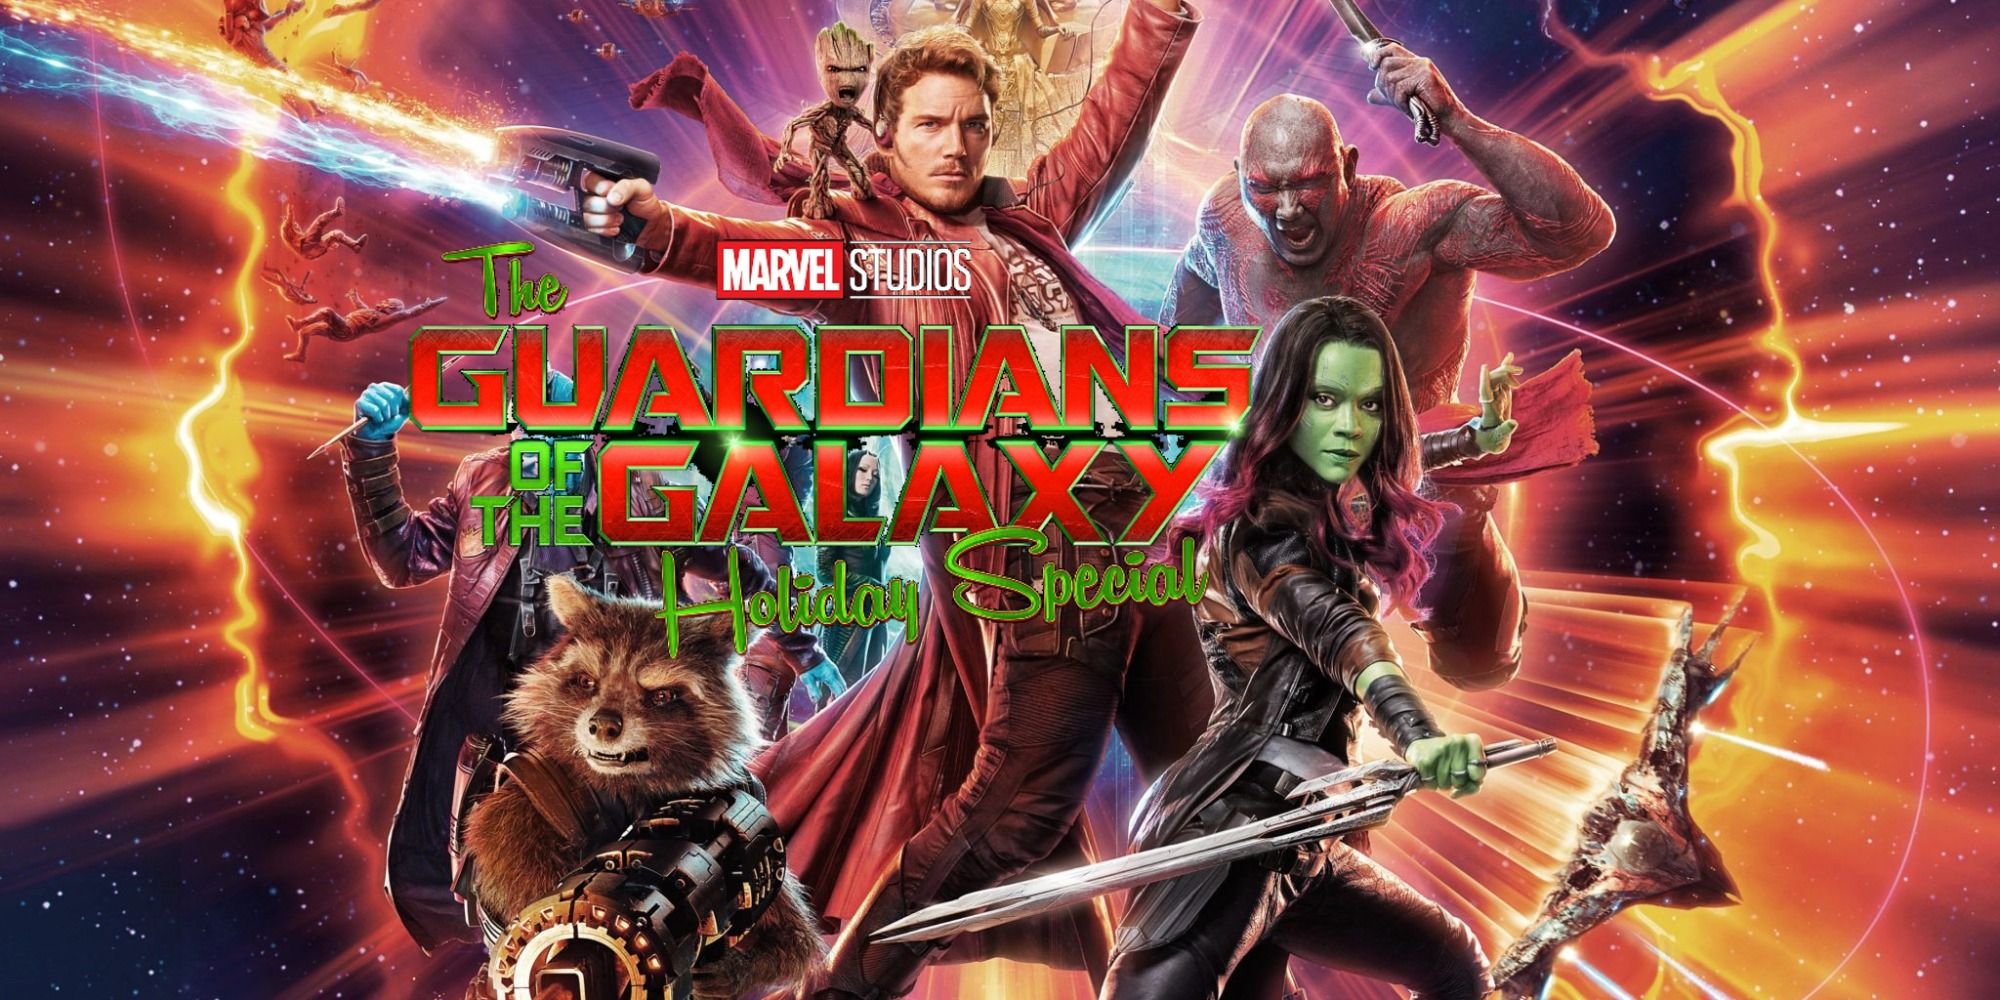 Guardians of the Galaxy poster with Holiday Special logo